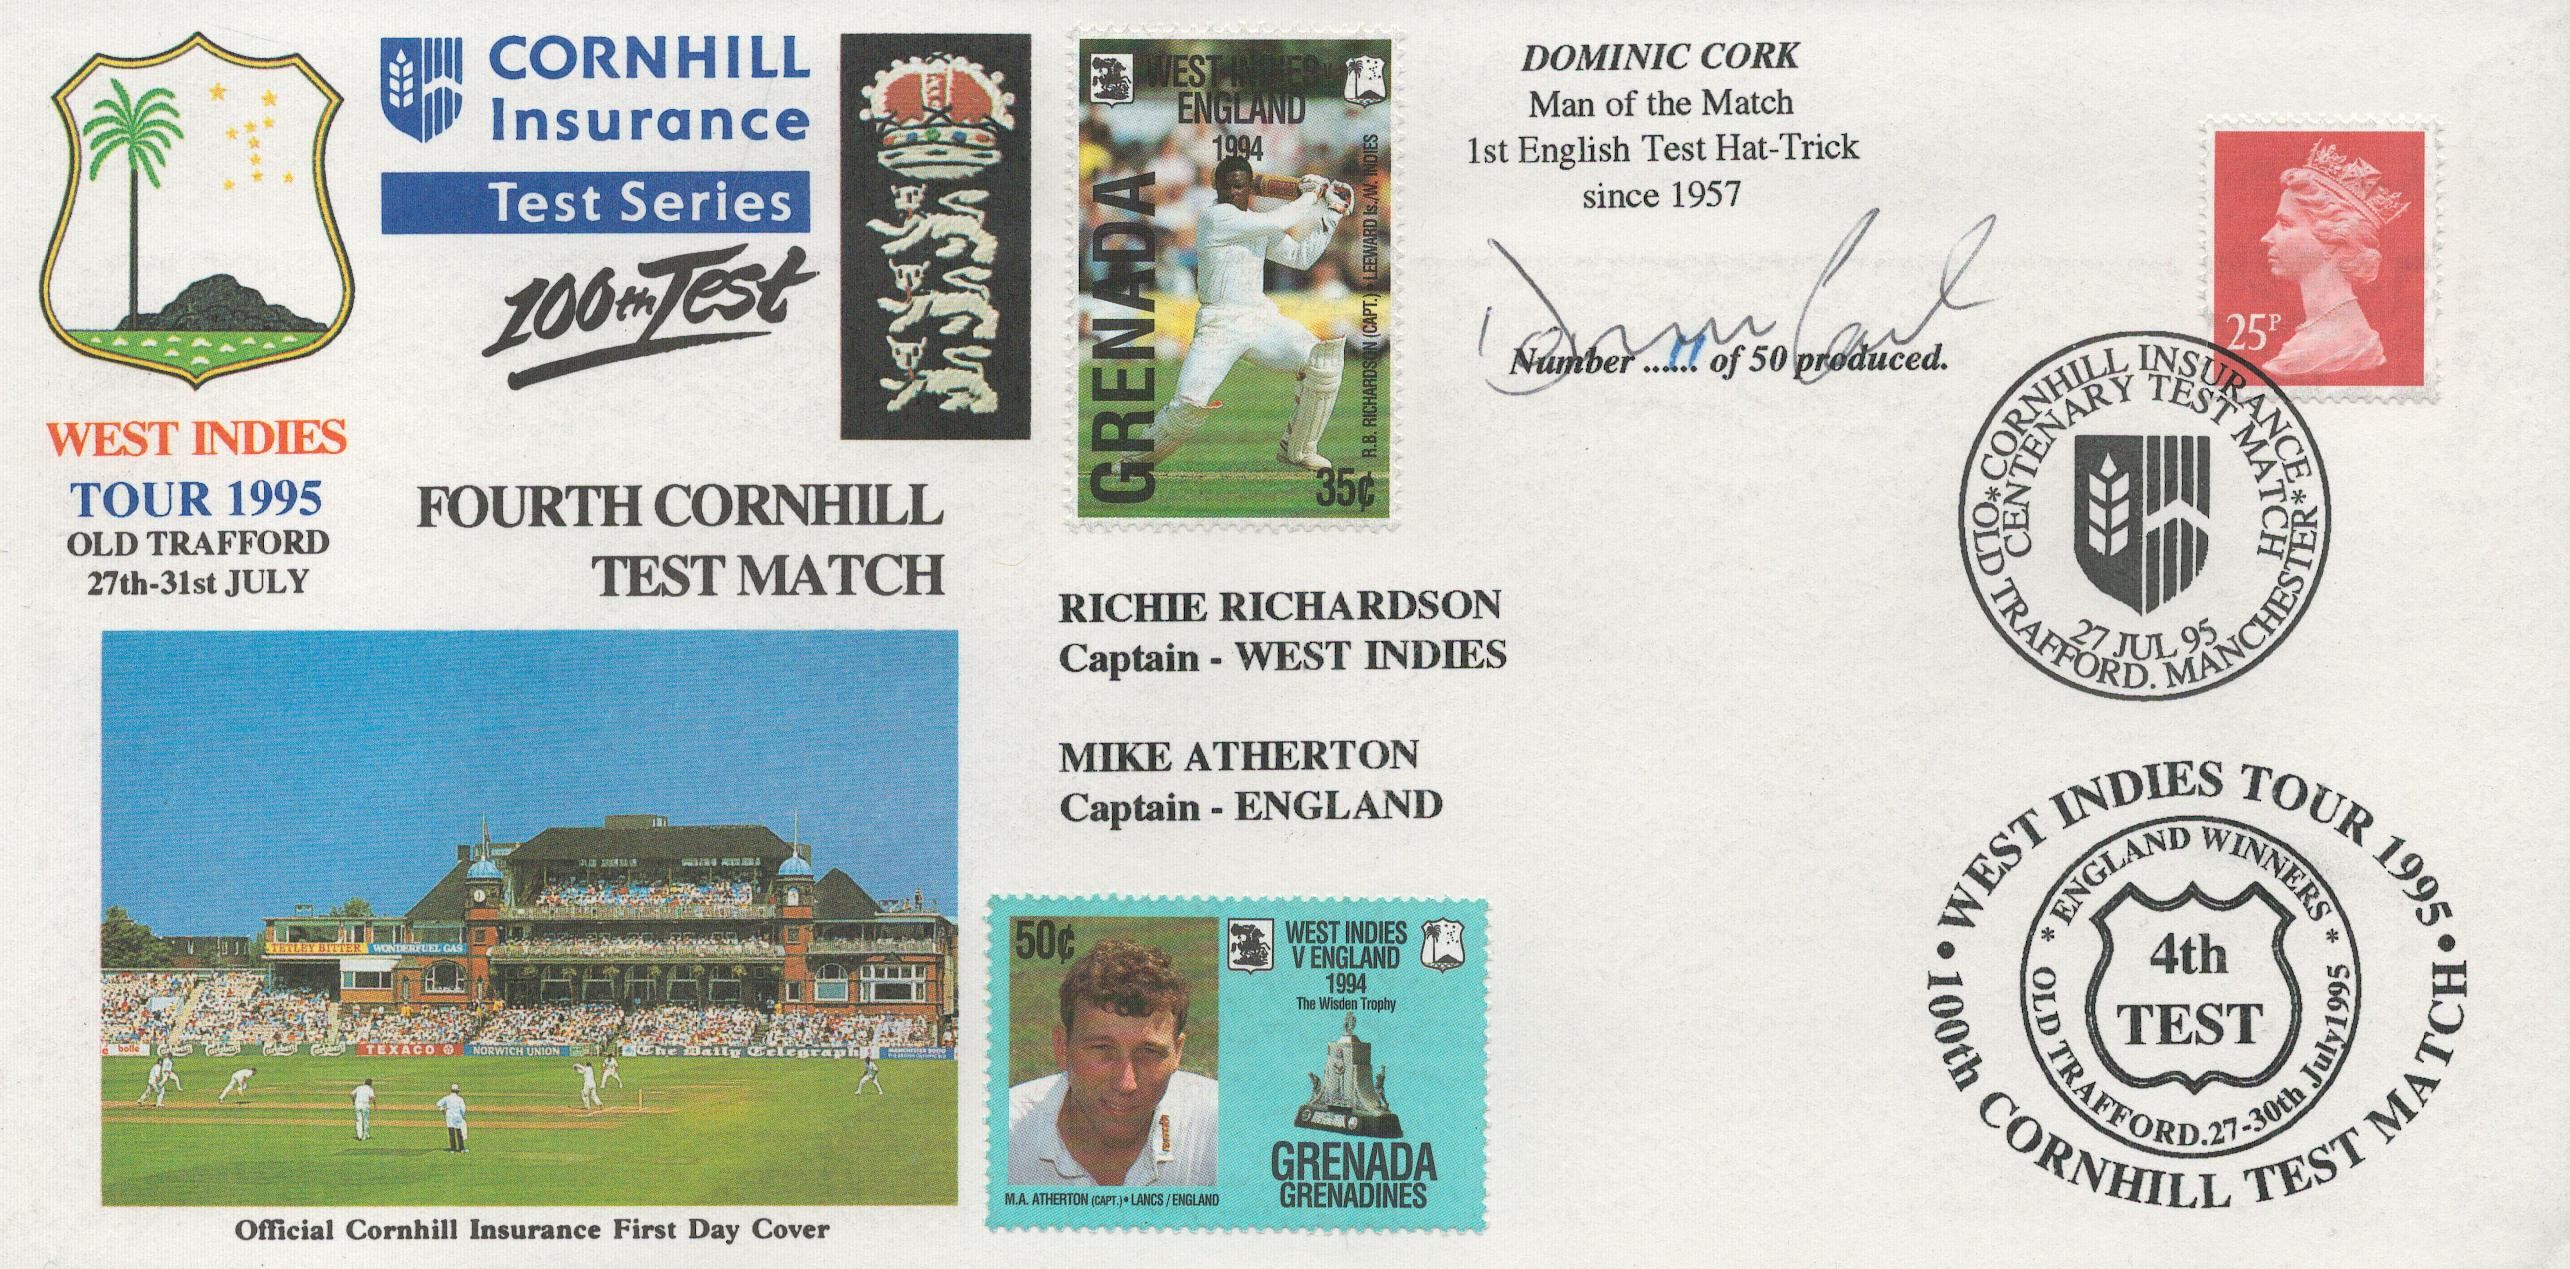 Cricket Dominic Cork Signed West Indies Tour 1995 First Day Cover. Good condition. All autographs